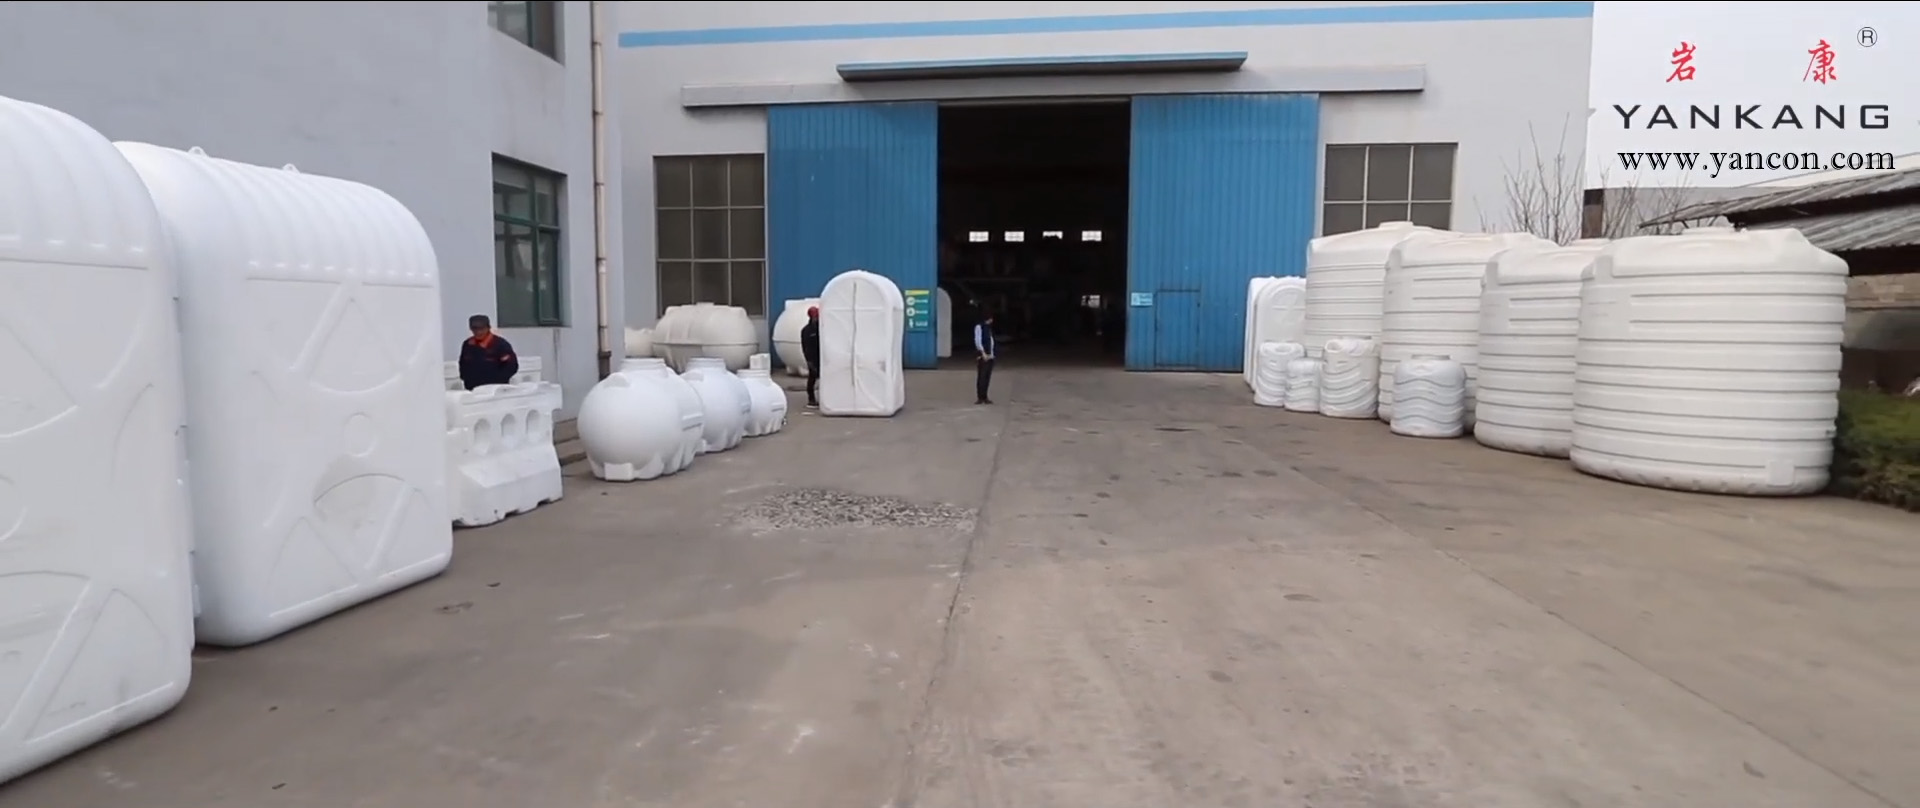 Yankang uses its blow molding machines to make a wide variety of products, including water tanks, IBCs, pallets, road barriers, kayaks, solar inner tanks, mobile toilets and more. 